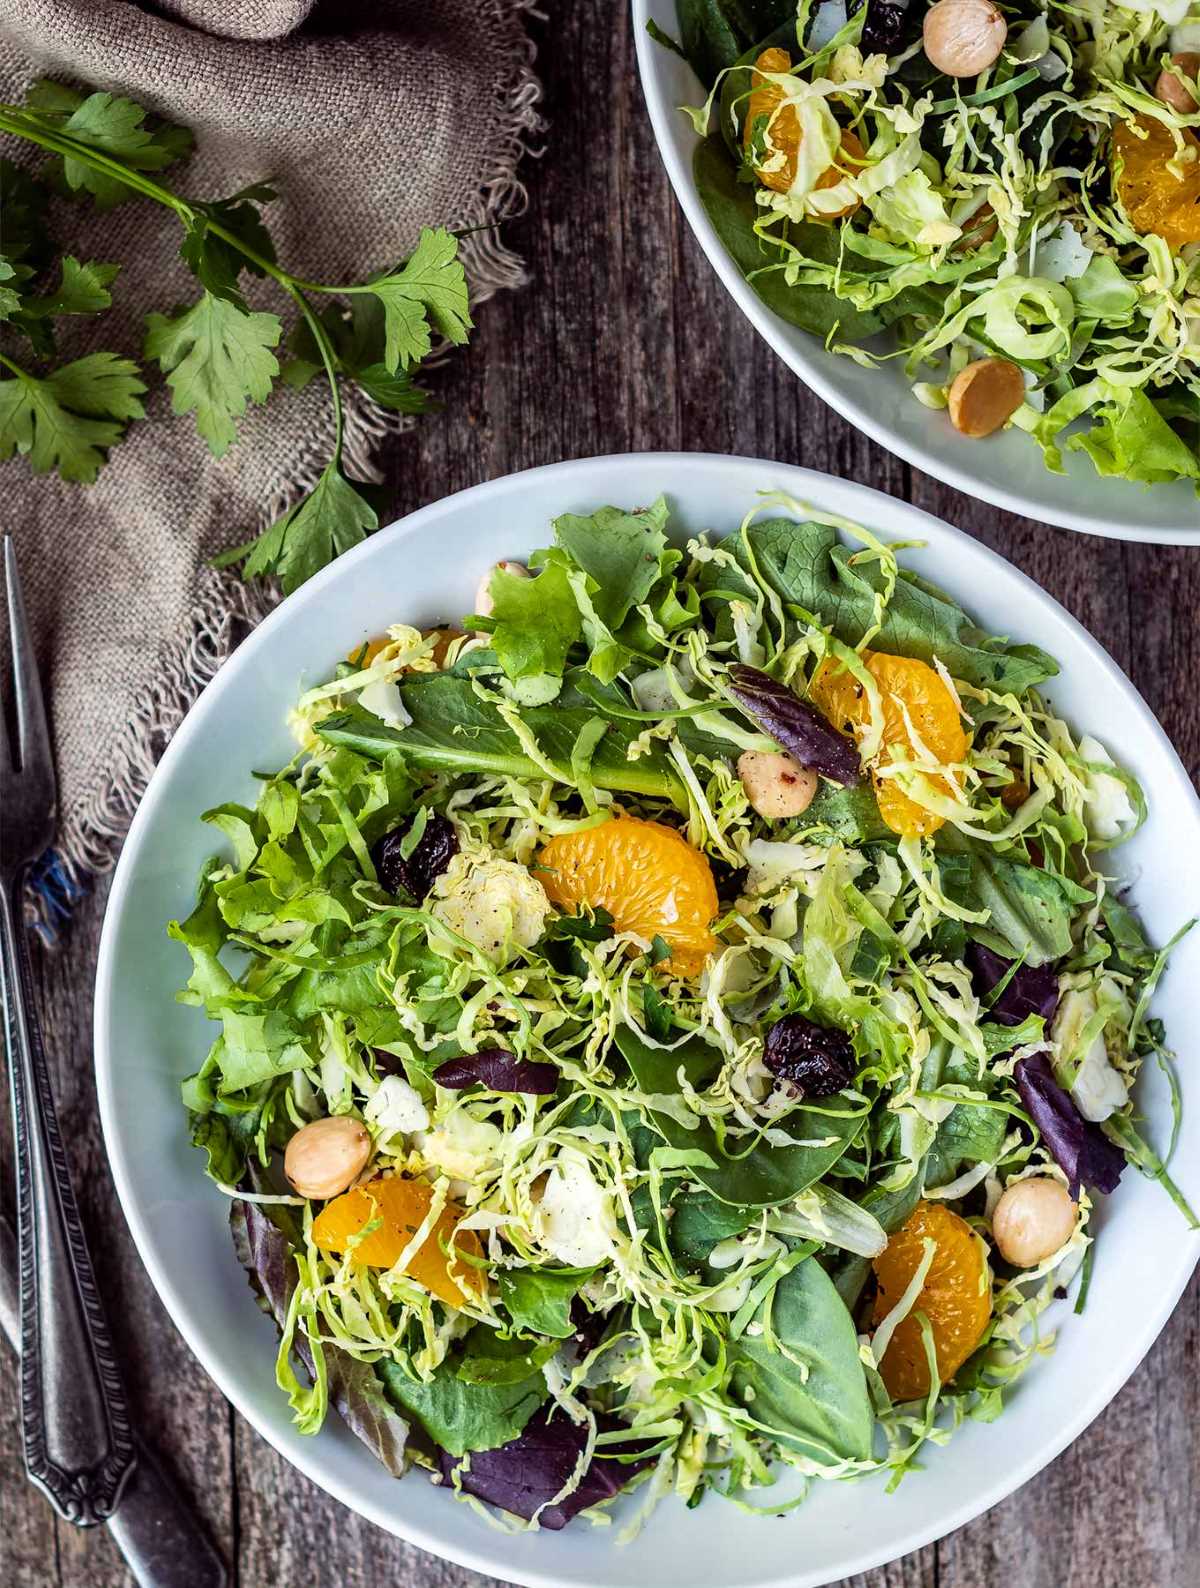 Delicious Vanilla Vegetable Salad For French Fridays